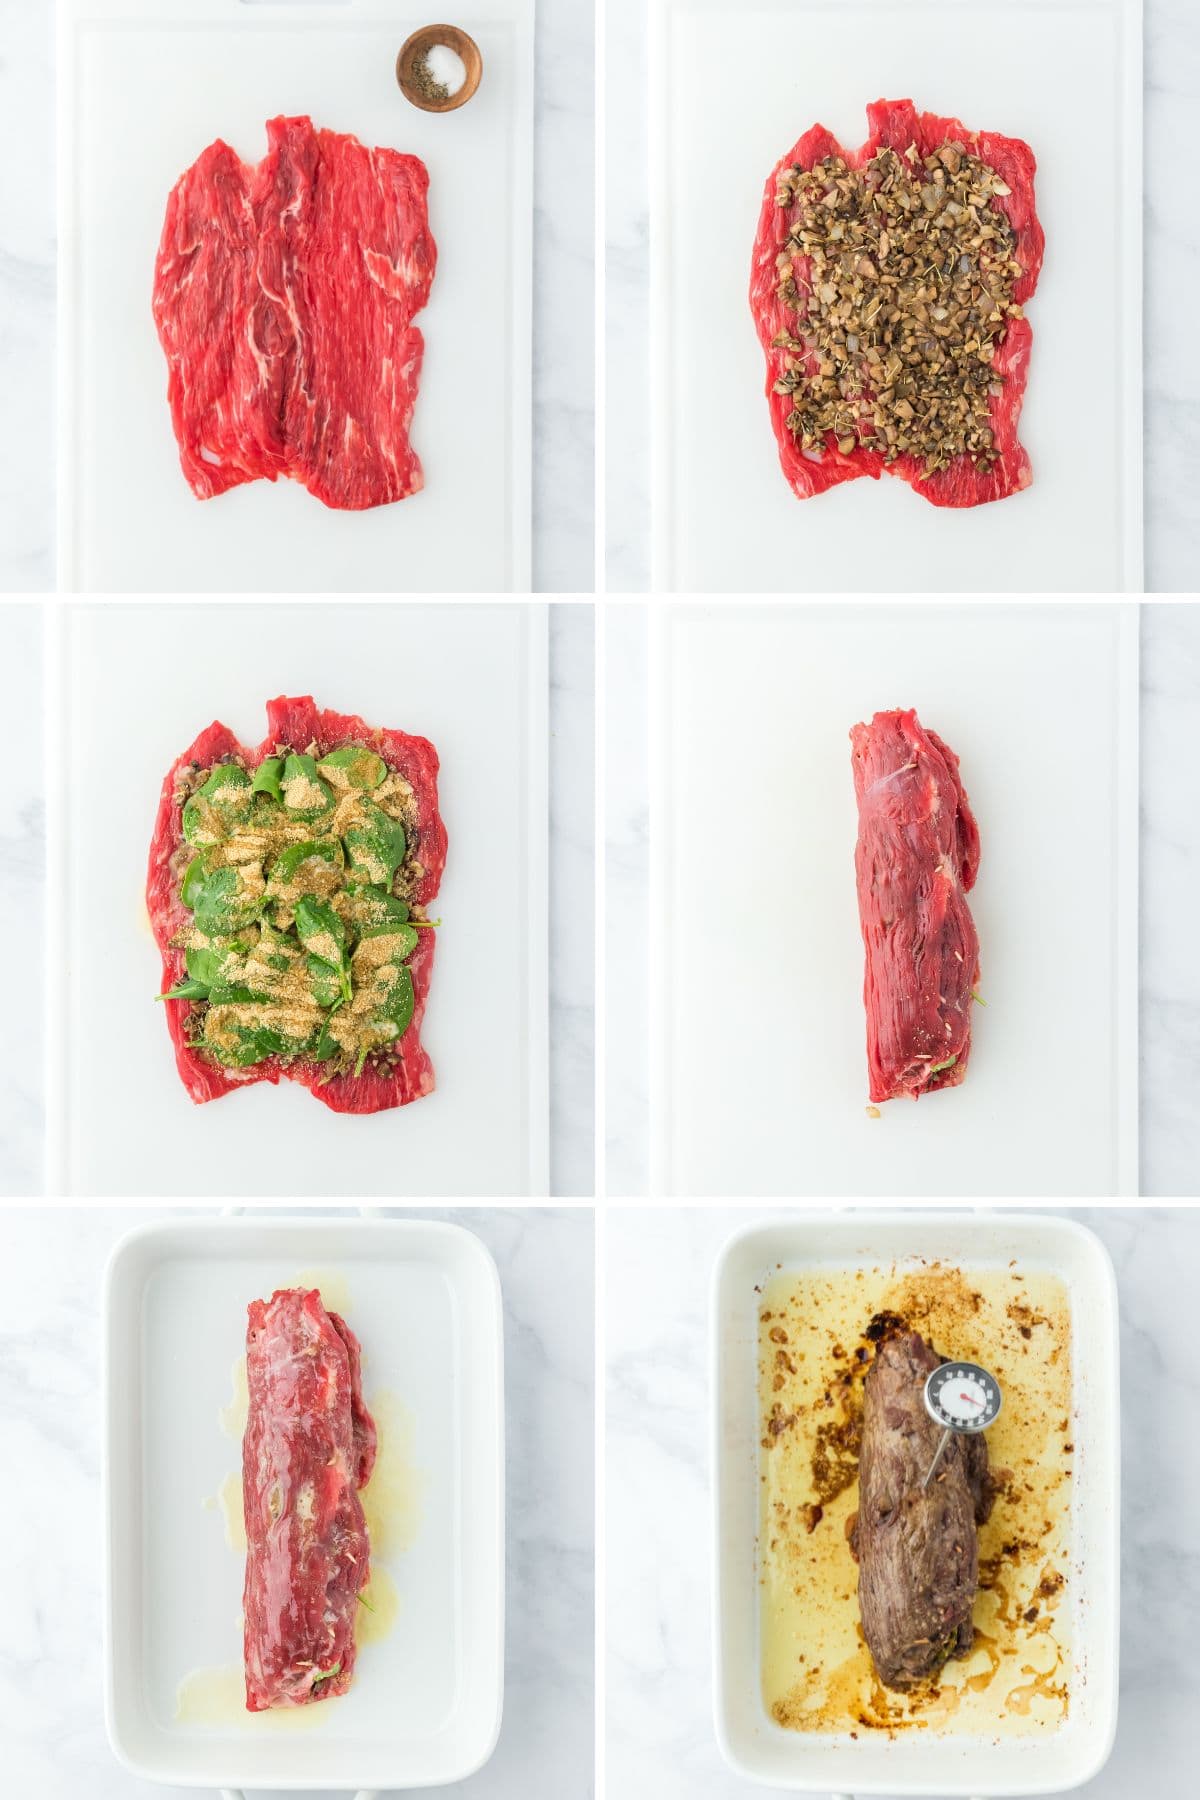 A step by step image collage on how to make stuffed flank steak with seasoning and stuffing the steak, rolling it, and baking it